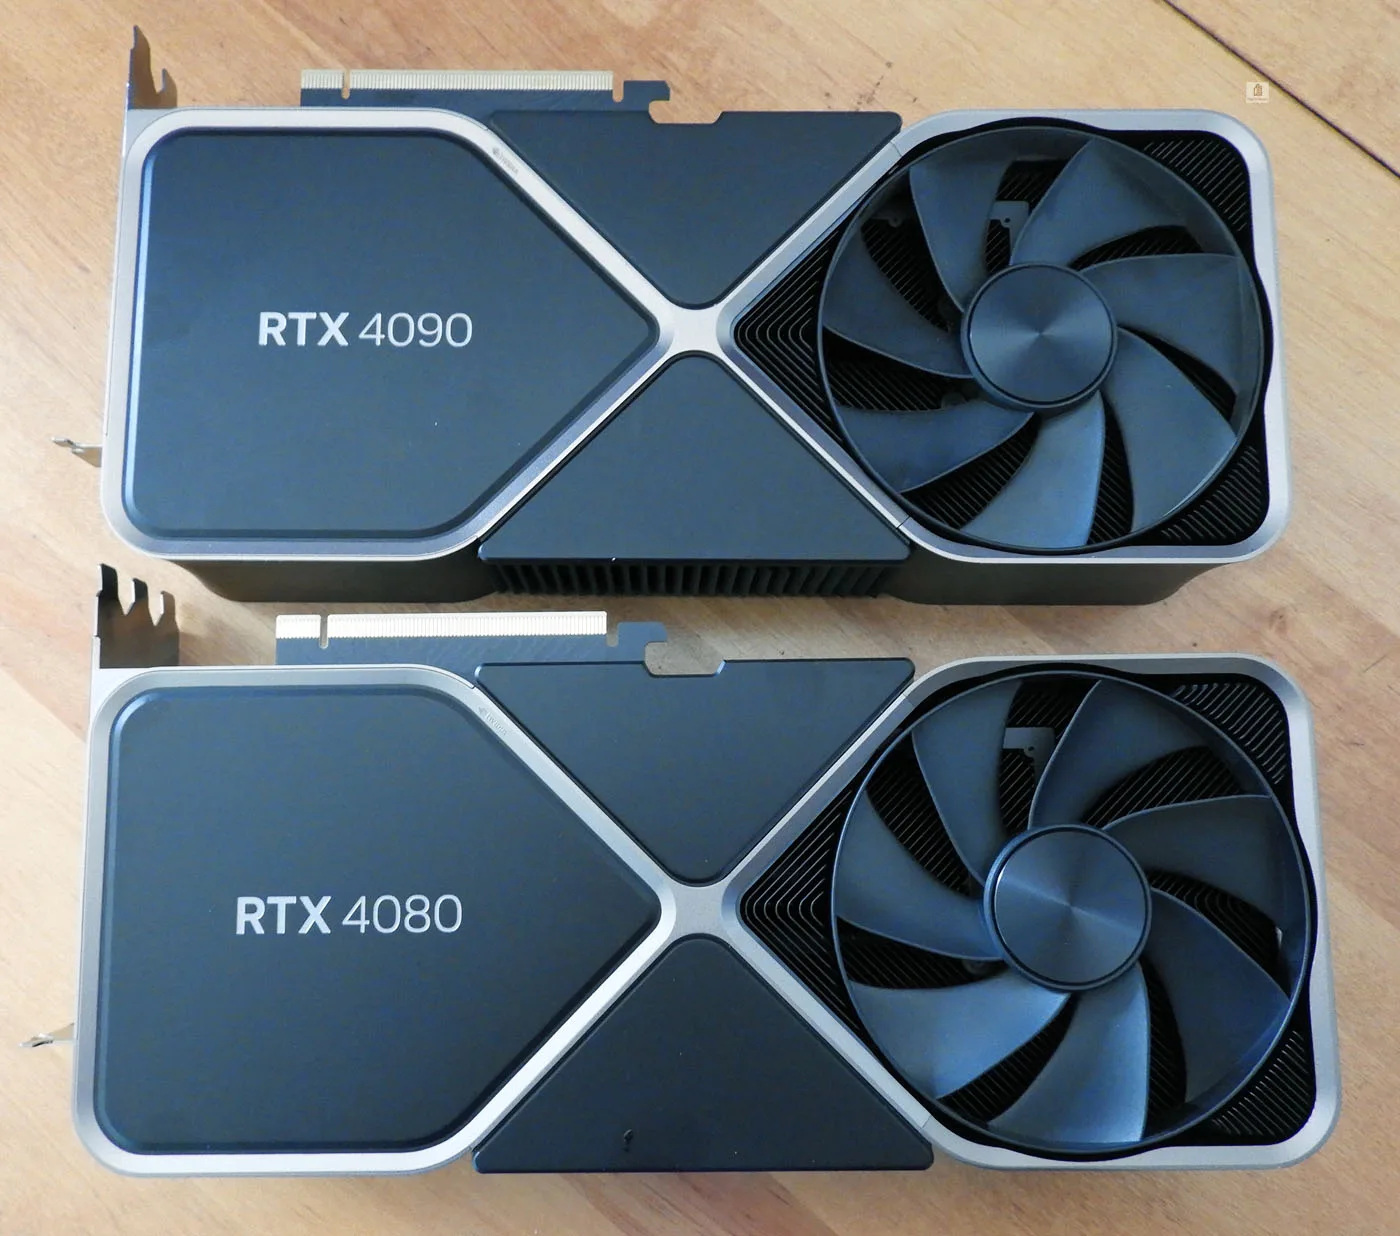 NVIDIA GeForce RTX 4090 & RTX 4080 Graphics Cards Prices Drop